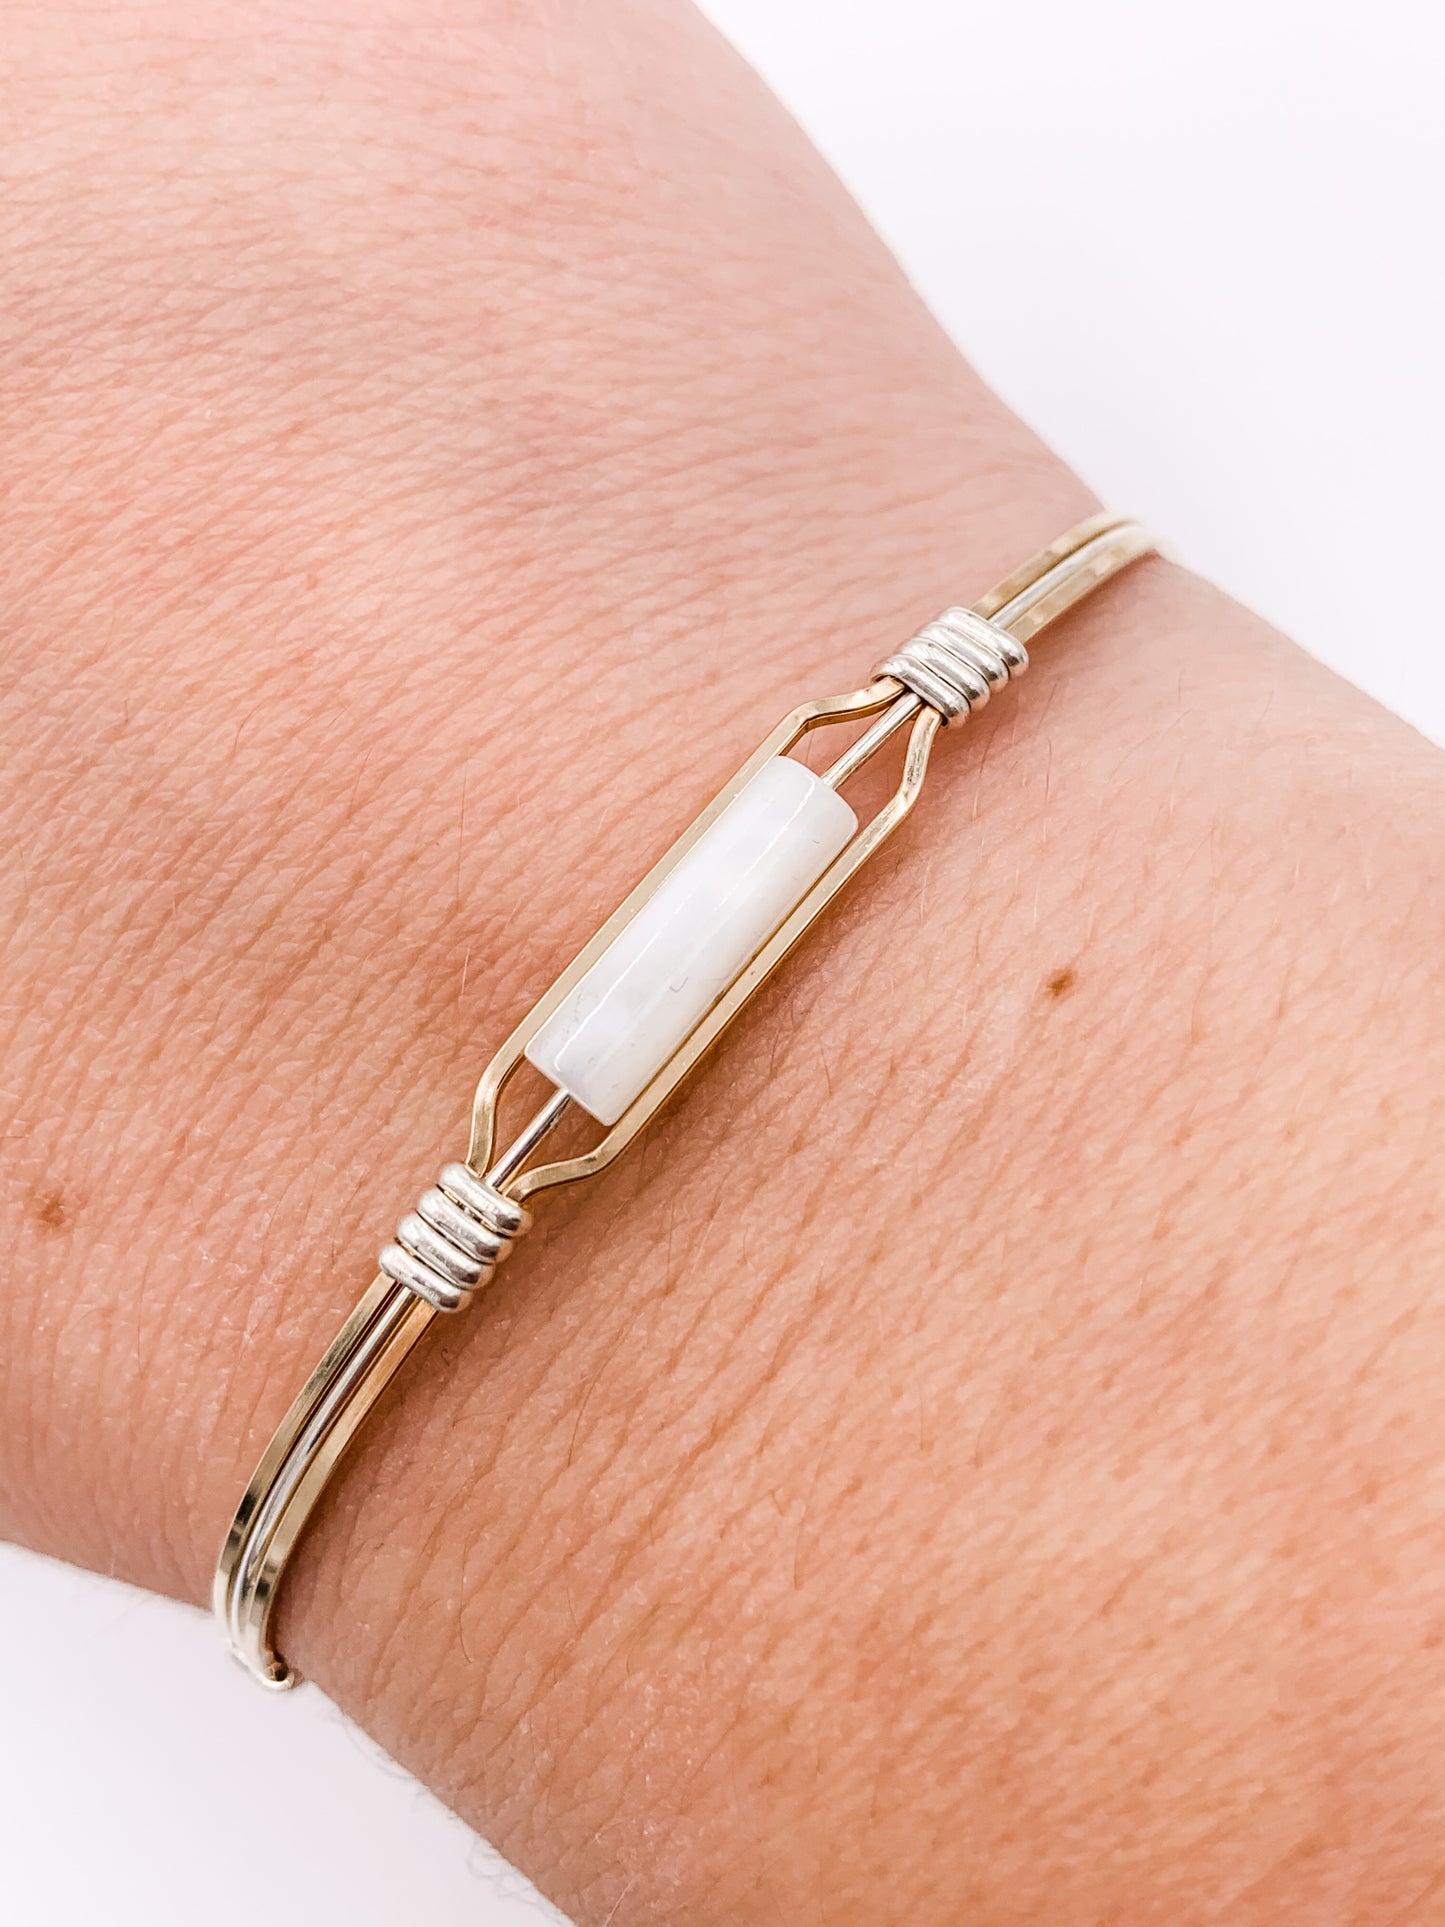 A Moment in Time Bracelet